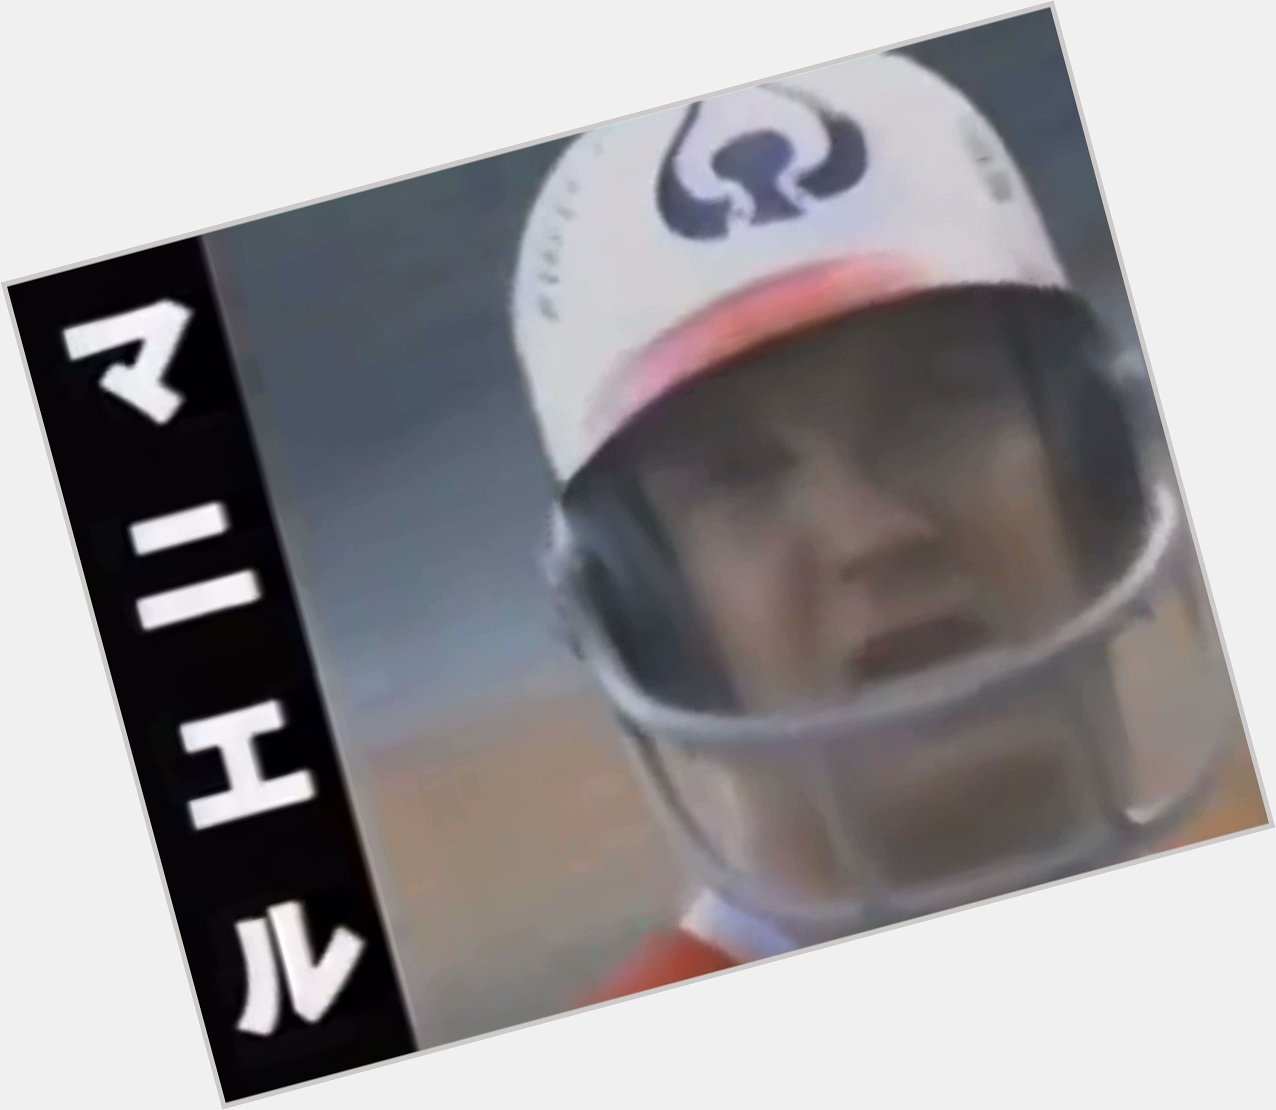 Happy birthday to Charlie Manuel. 

Here he is dominating Japanese baseball in the late 70s. 